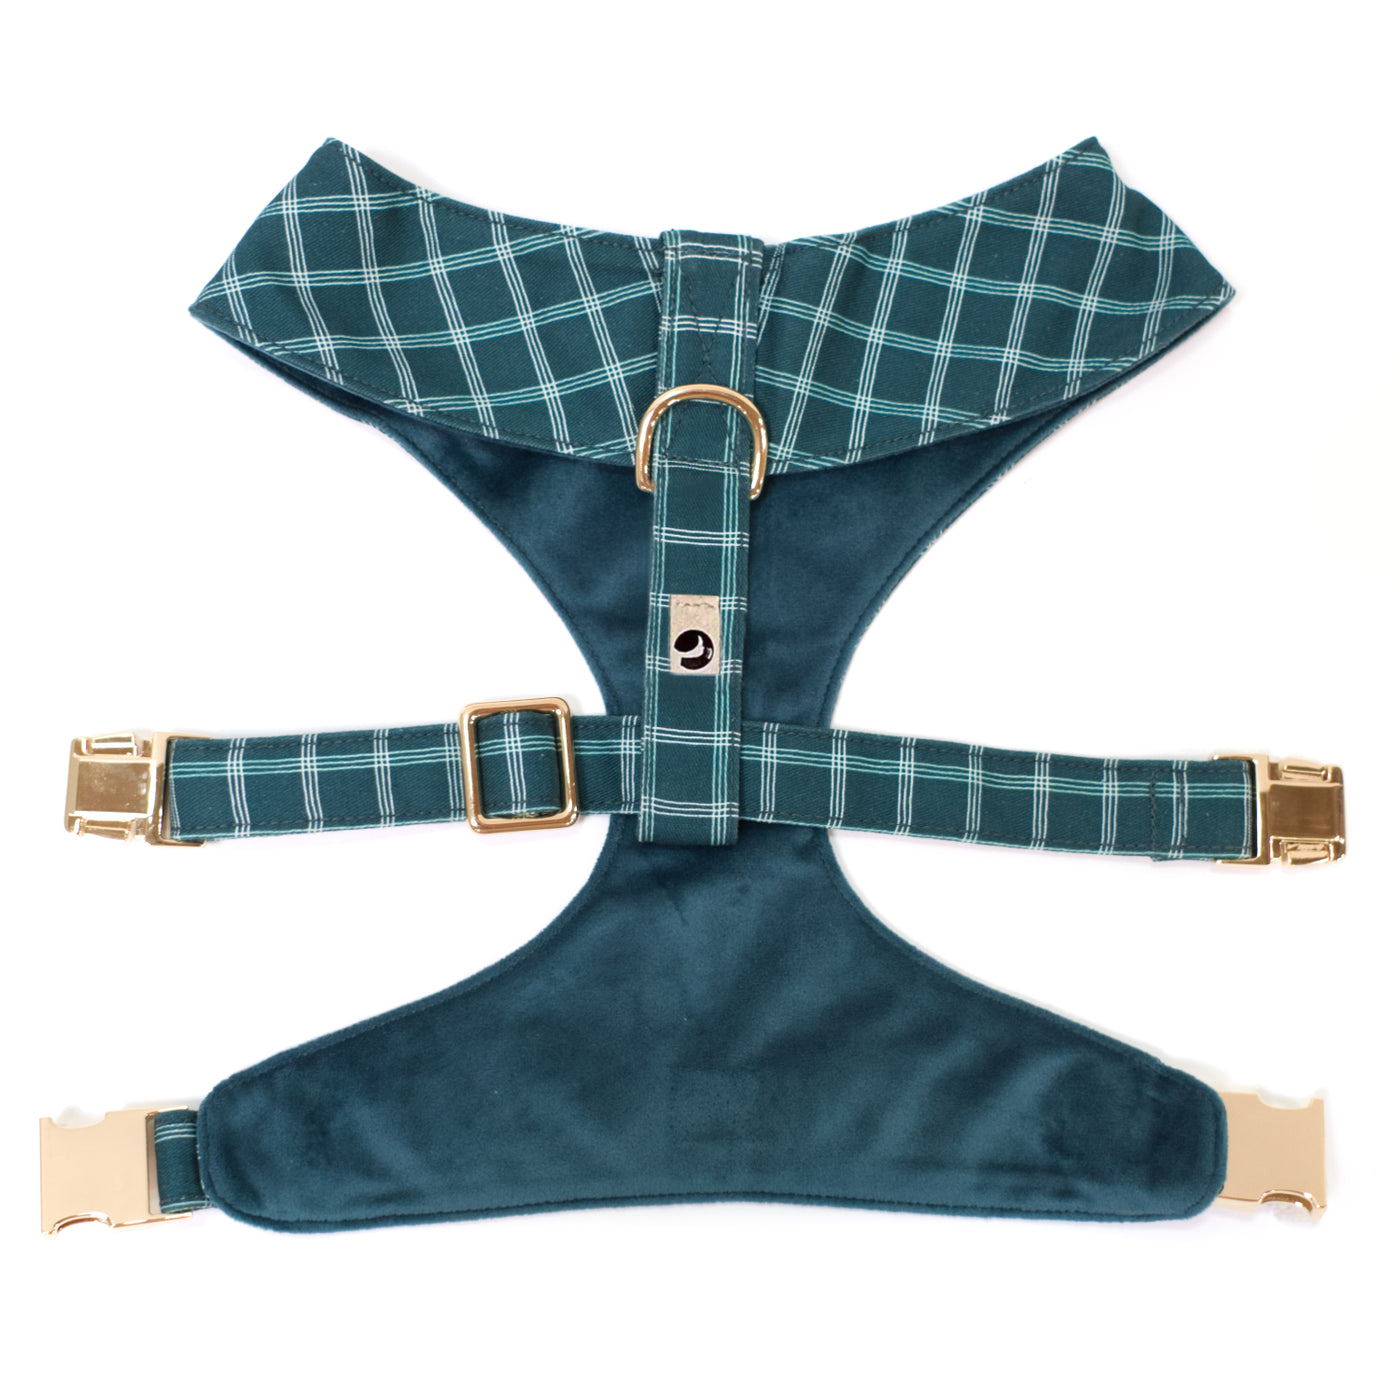 Windowpain plaid and velvet teal reversible dog harness with gold hardware